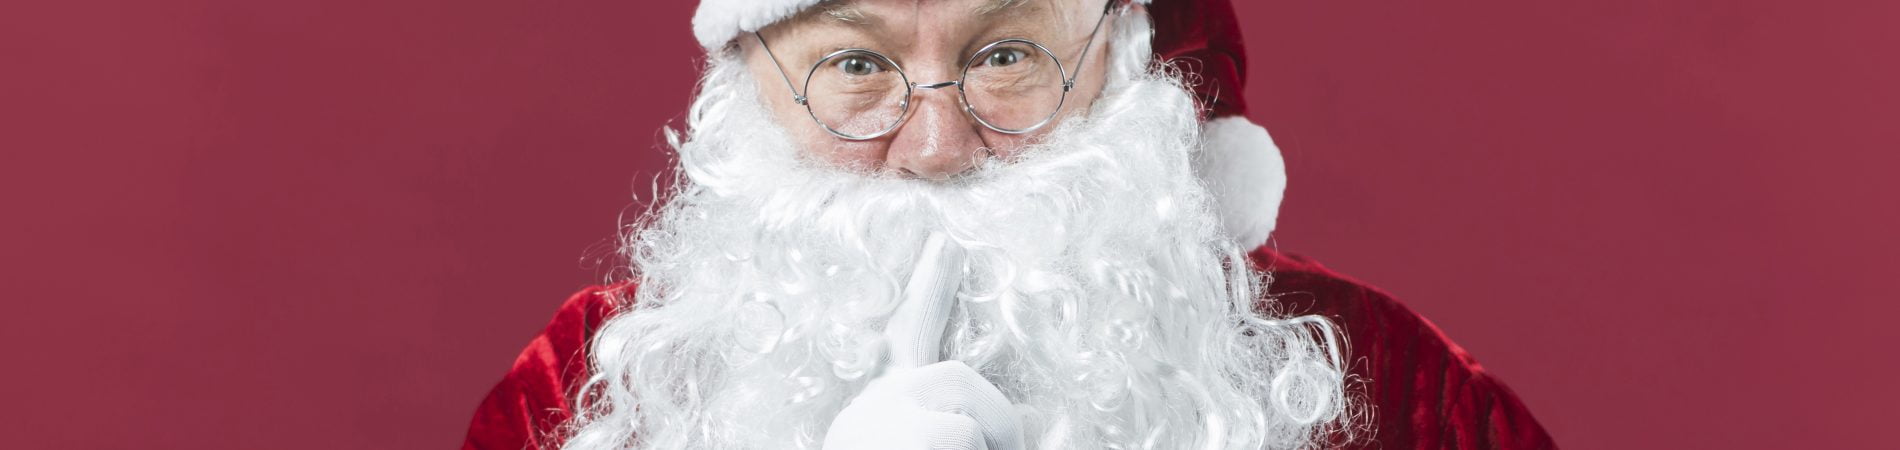 Secret Santa Shame: Sorting the naughty from the nice this Christmas